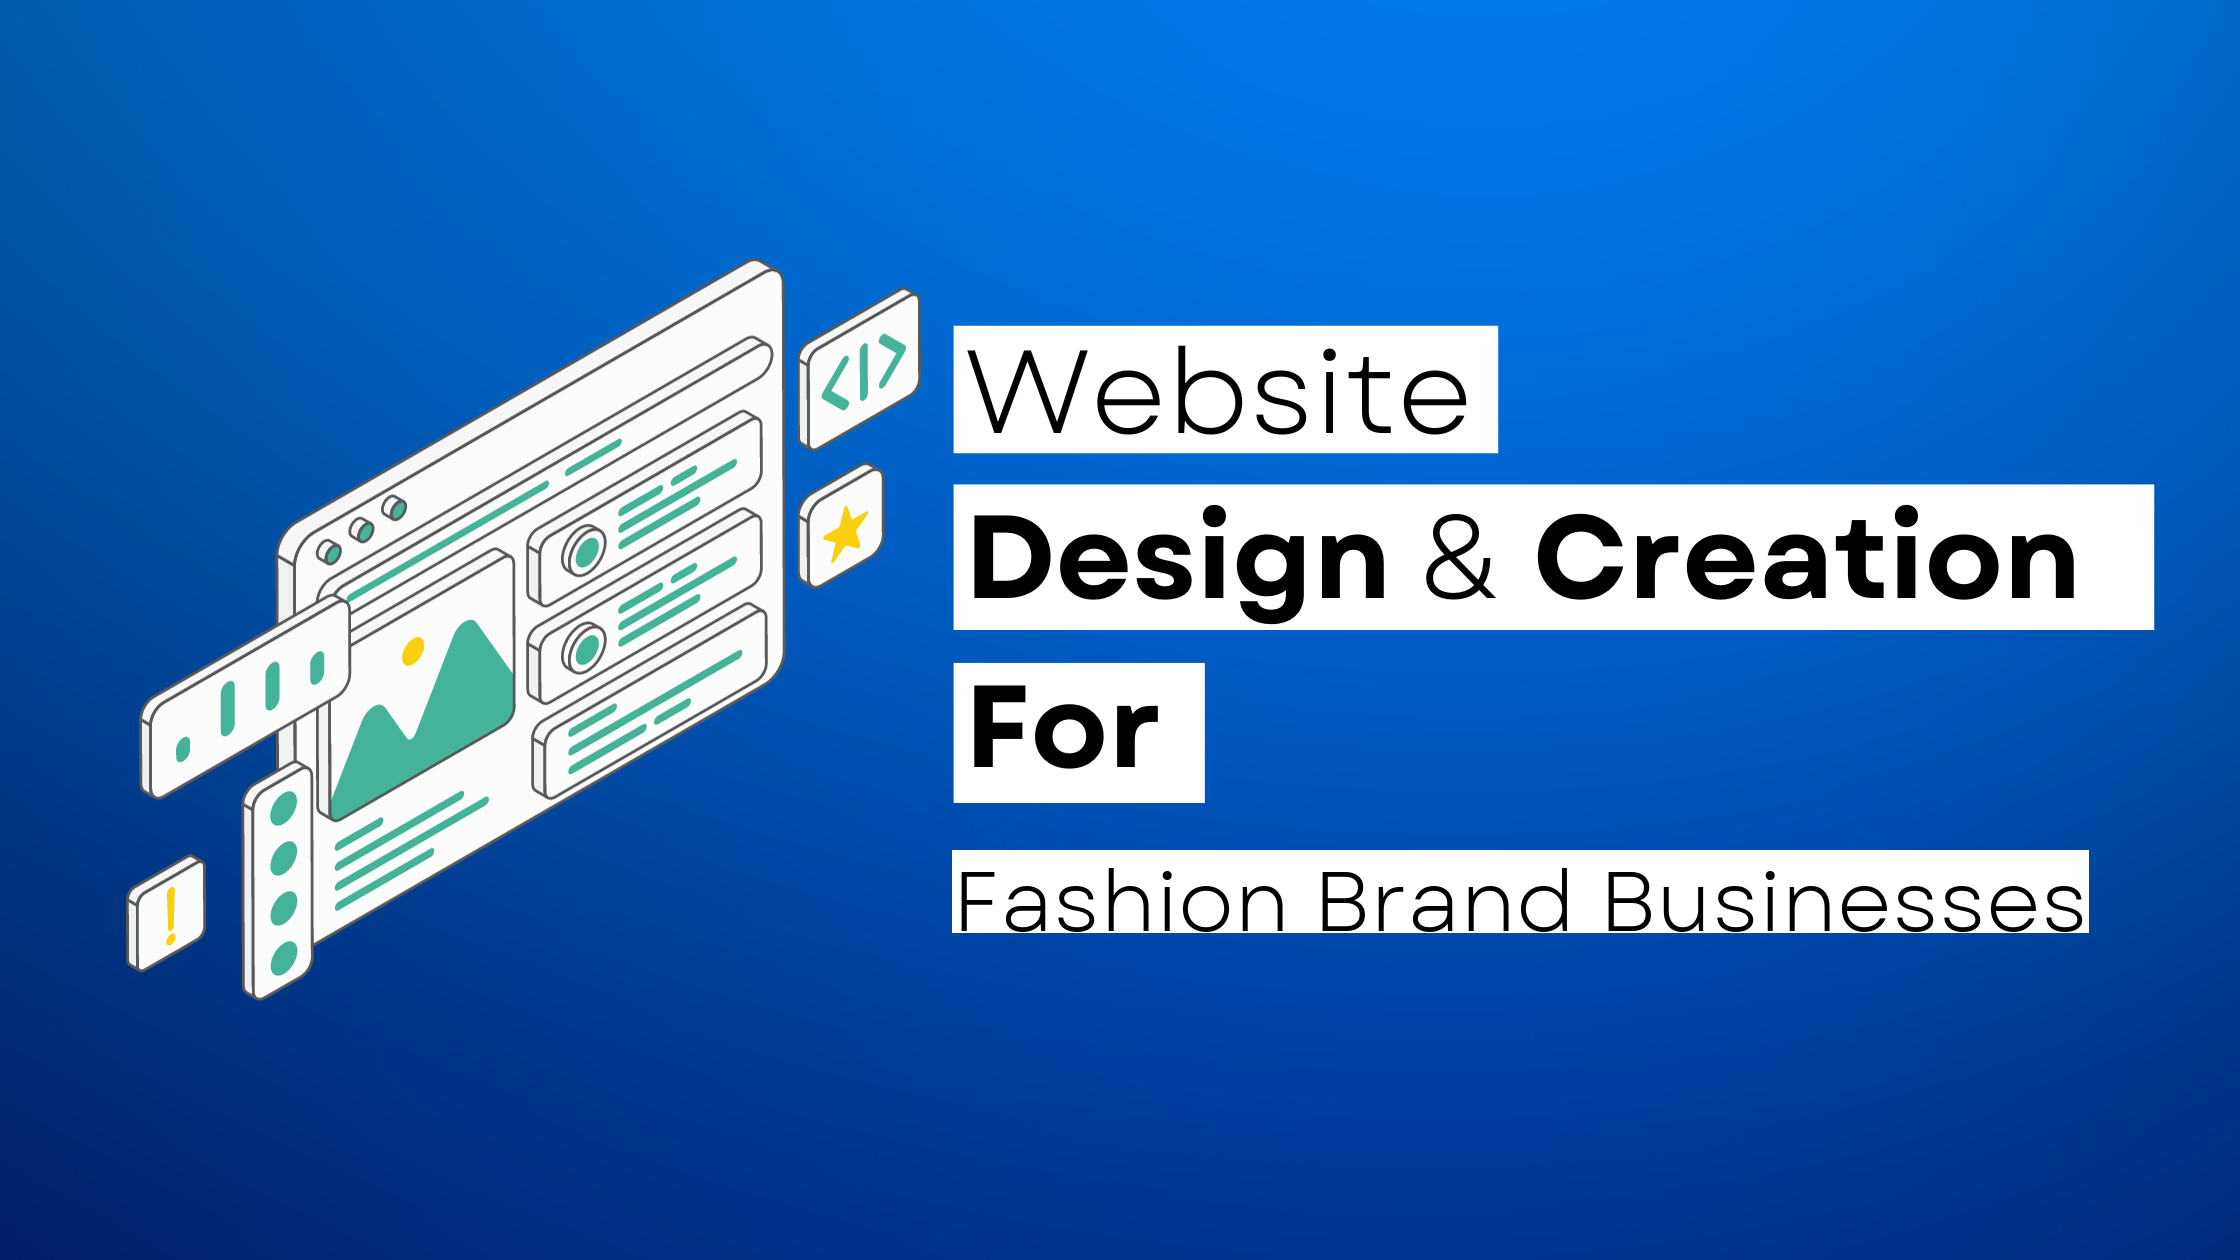 How to start a Fashion Brand website